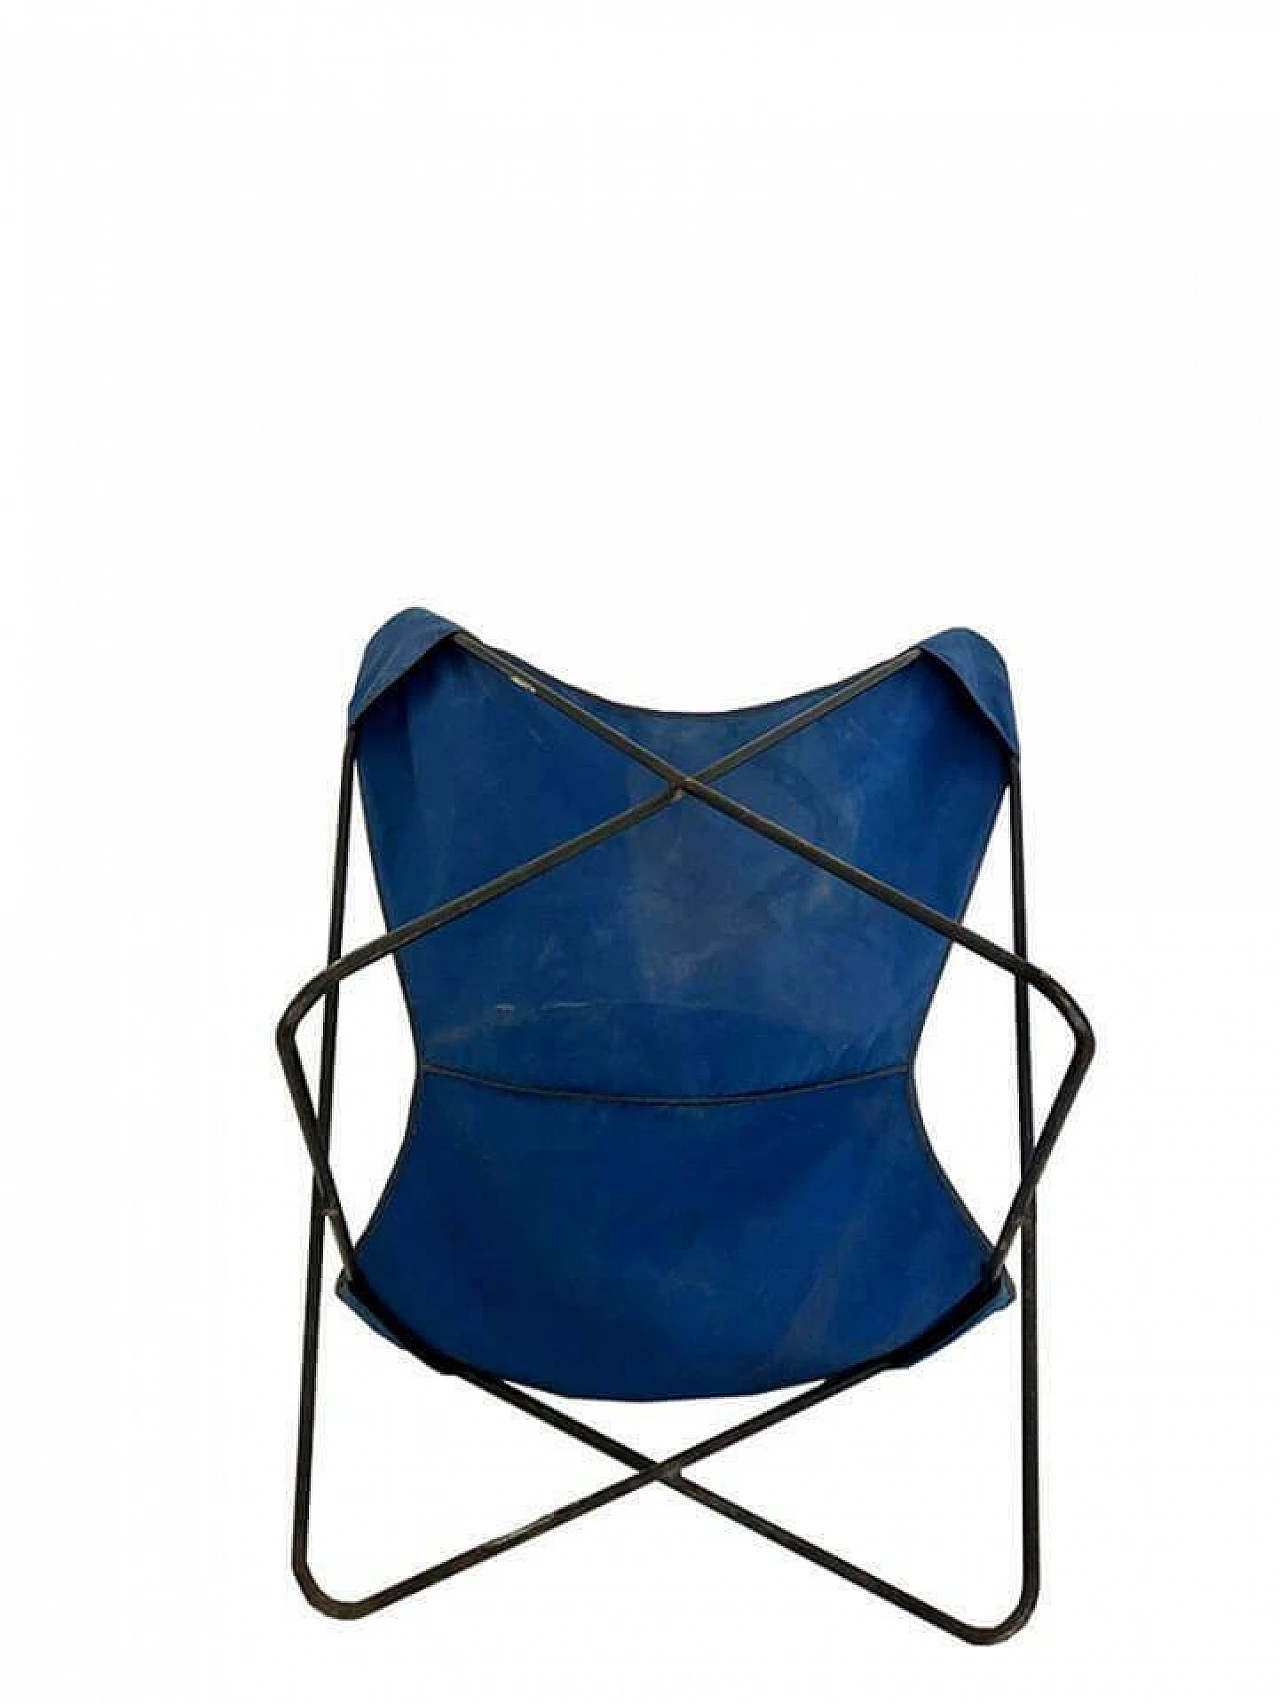 Butterfly armchair by Jeorge Hardoy Ferrari for Knoll, 70's 1110062